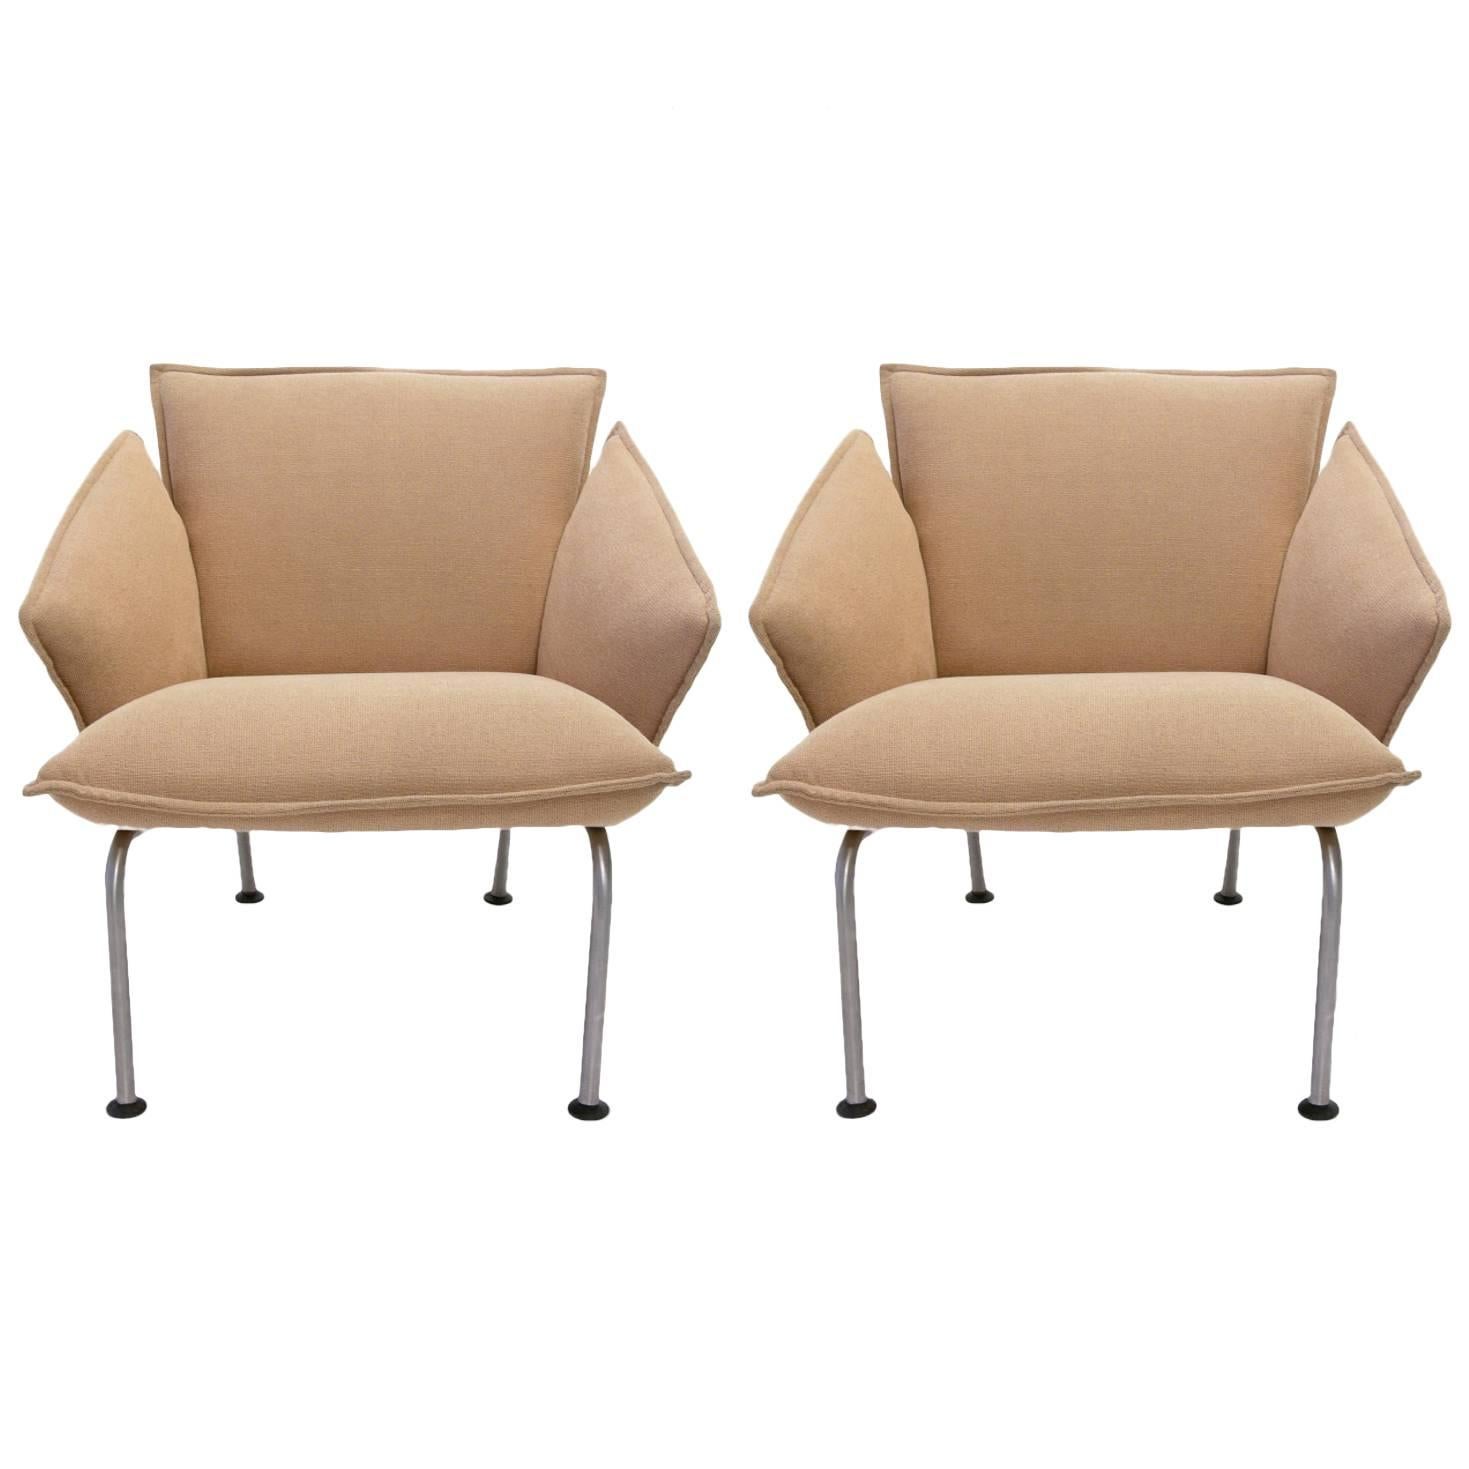 Pair of "Vicolounge" Chairs by Vico Magistretti for Fritz Hansen